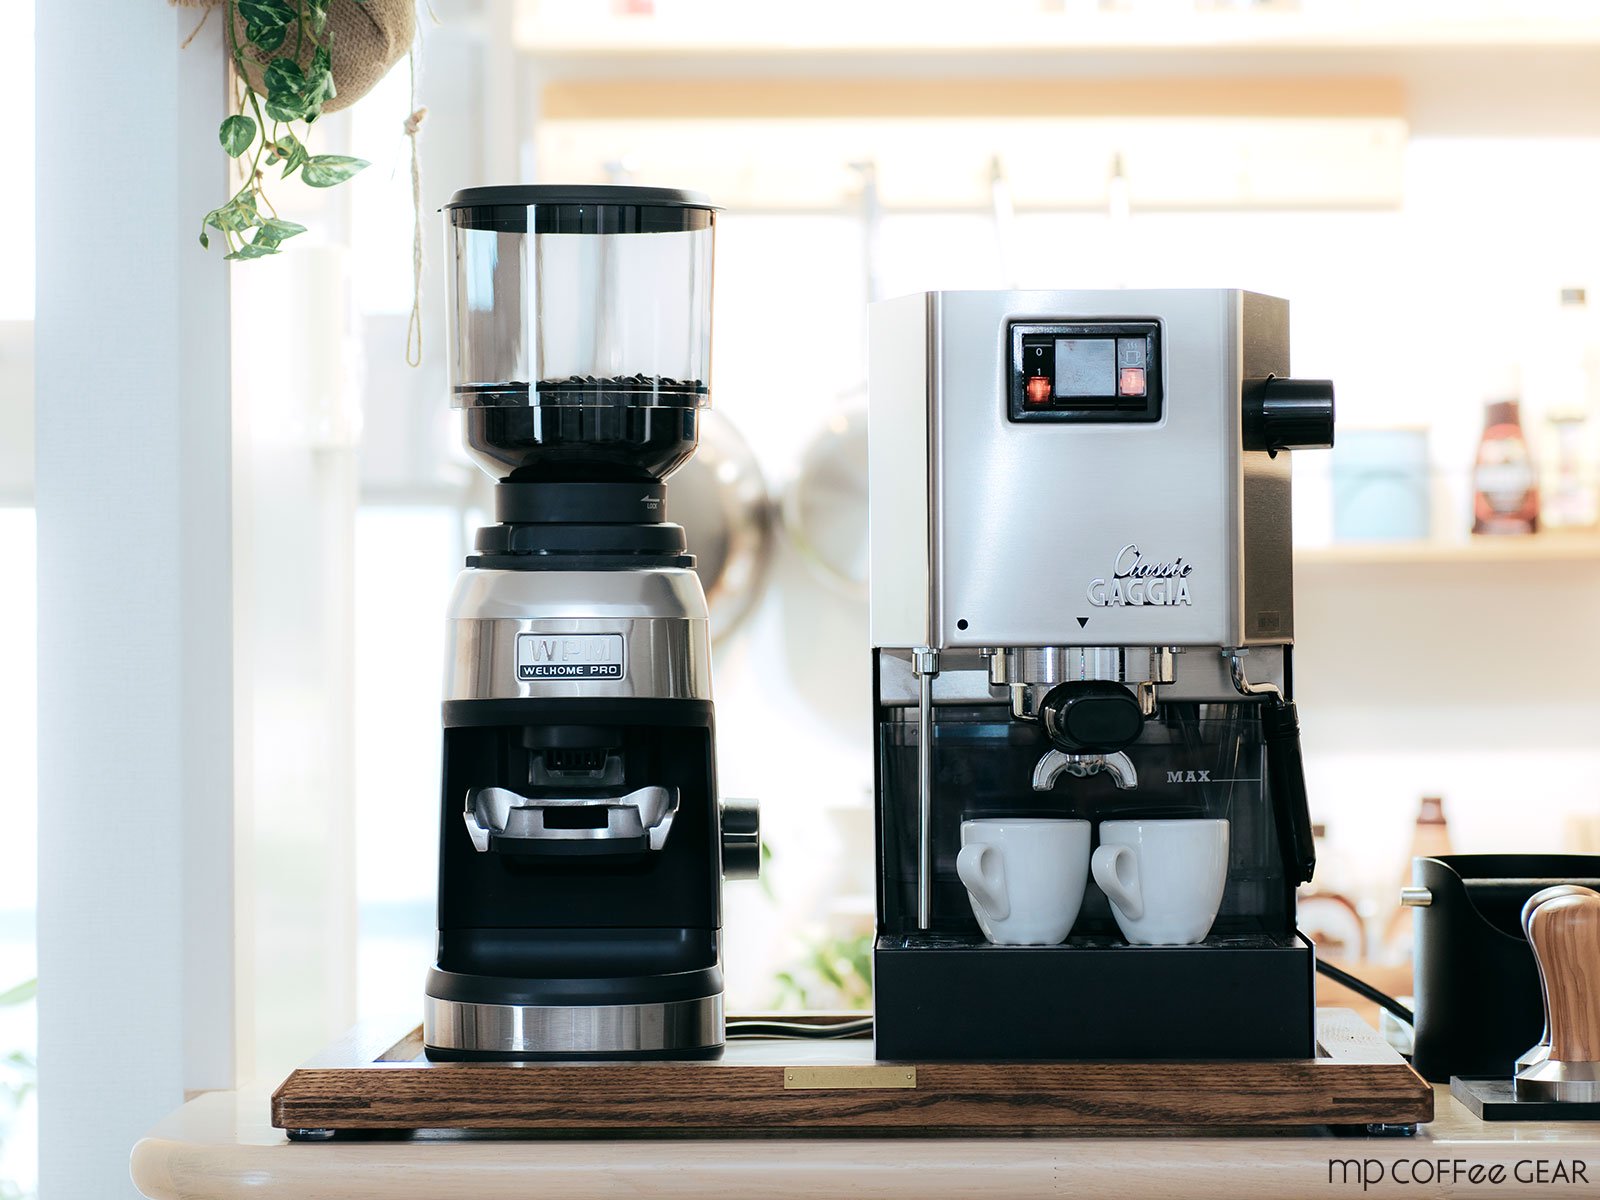 GAGGIA ガジア セミオートエスプレッソマシン Classic クラシック<img class='new_mark_img2' src='https://img.shop-pro.jp/img/new/icons34.gif' style='border:none;display:inline;margin:0px;padding:0px;width:auto;' />